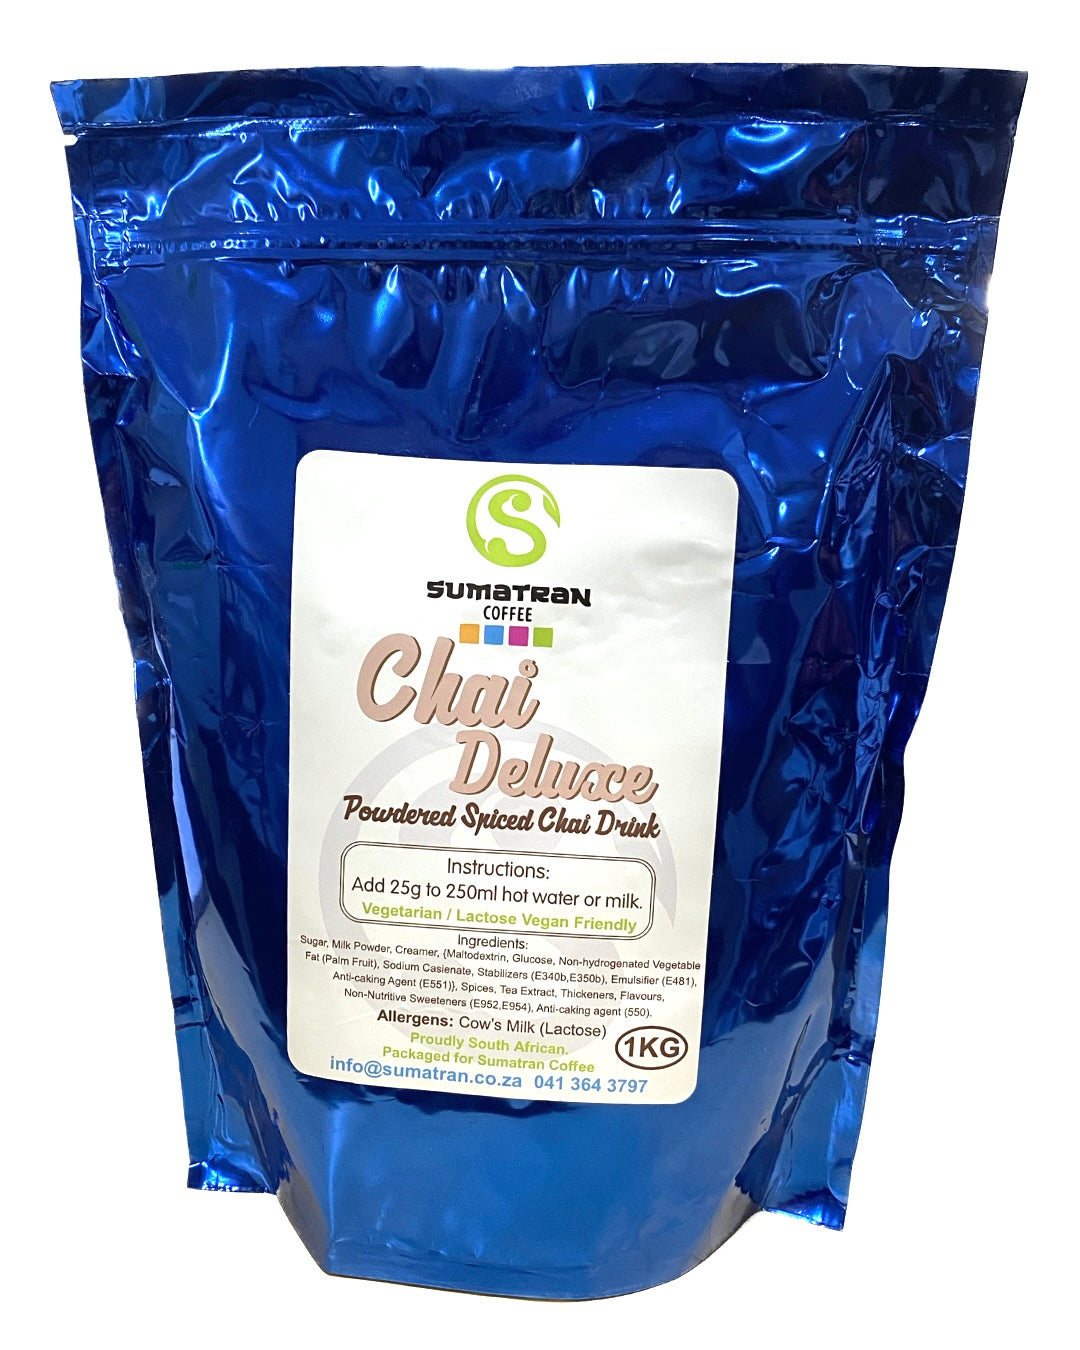 Spiced Chai Deluxe 1kg bag